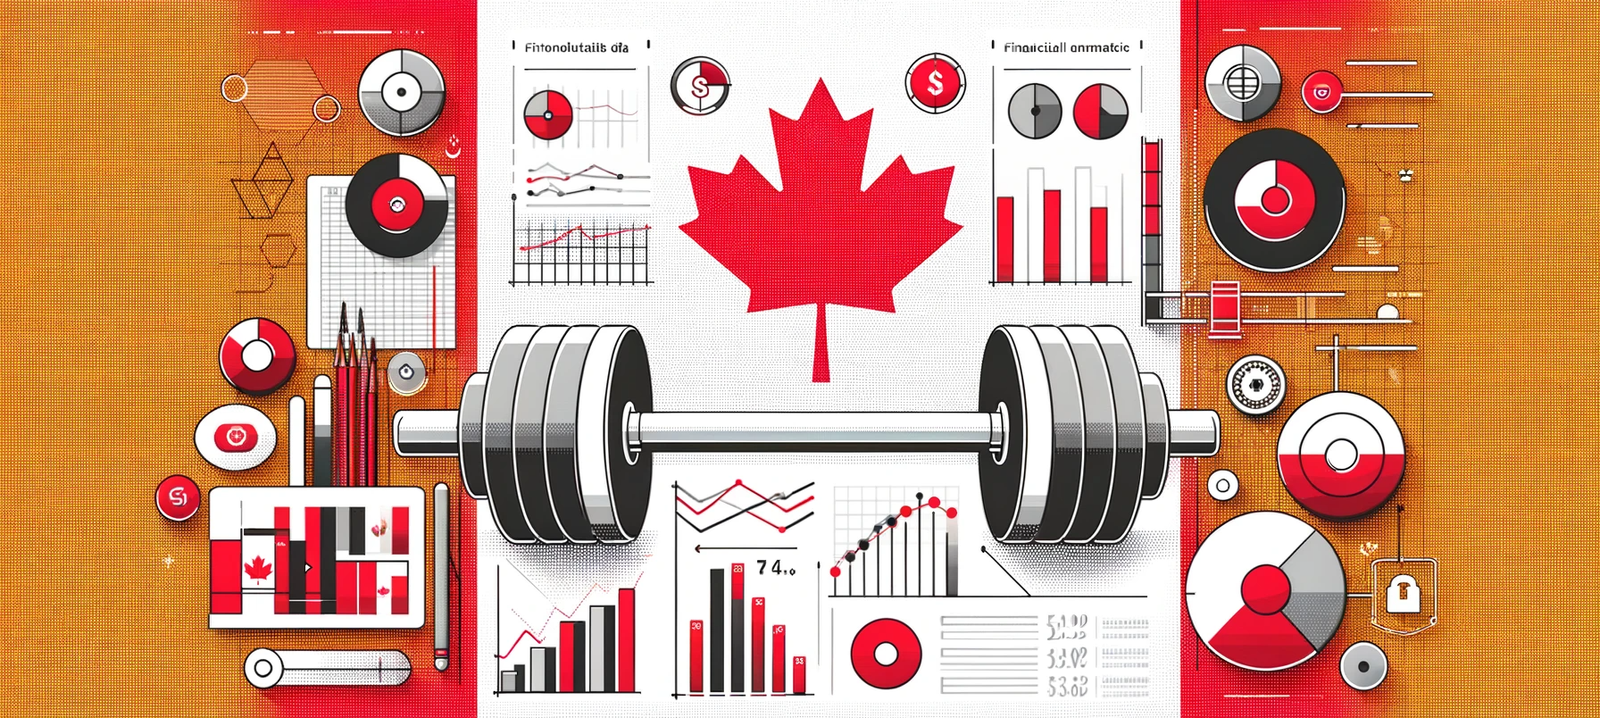 Featured image for “Canadian Weightlifting Financials – A detailed analysis”